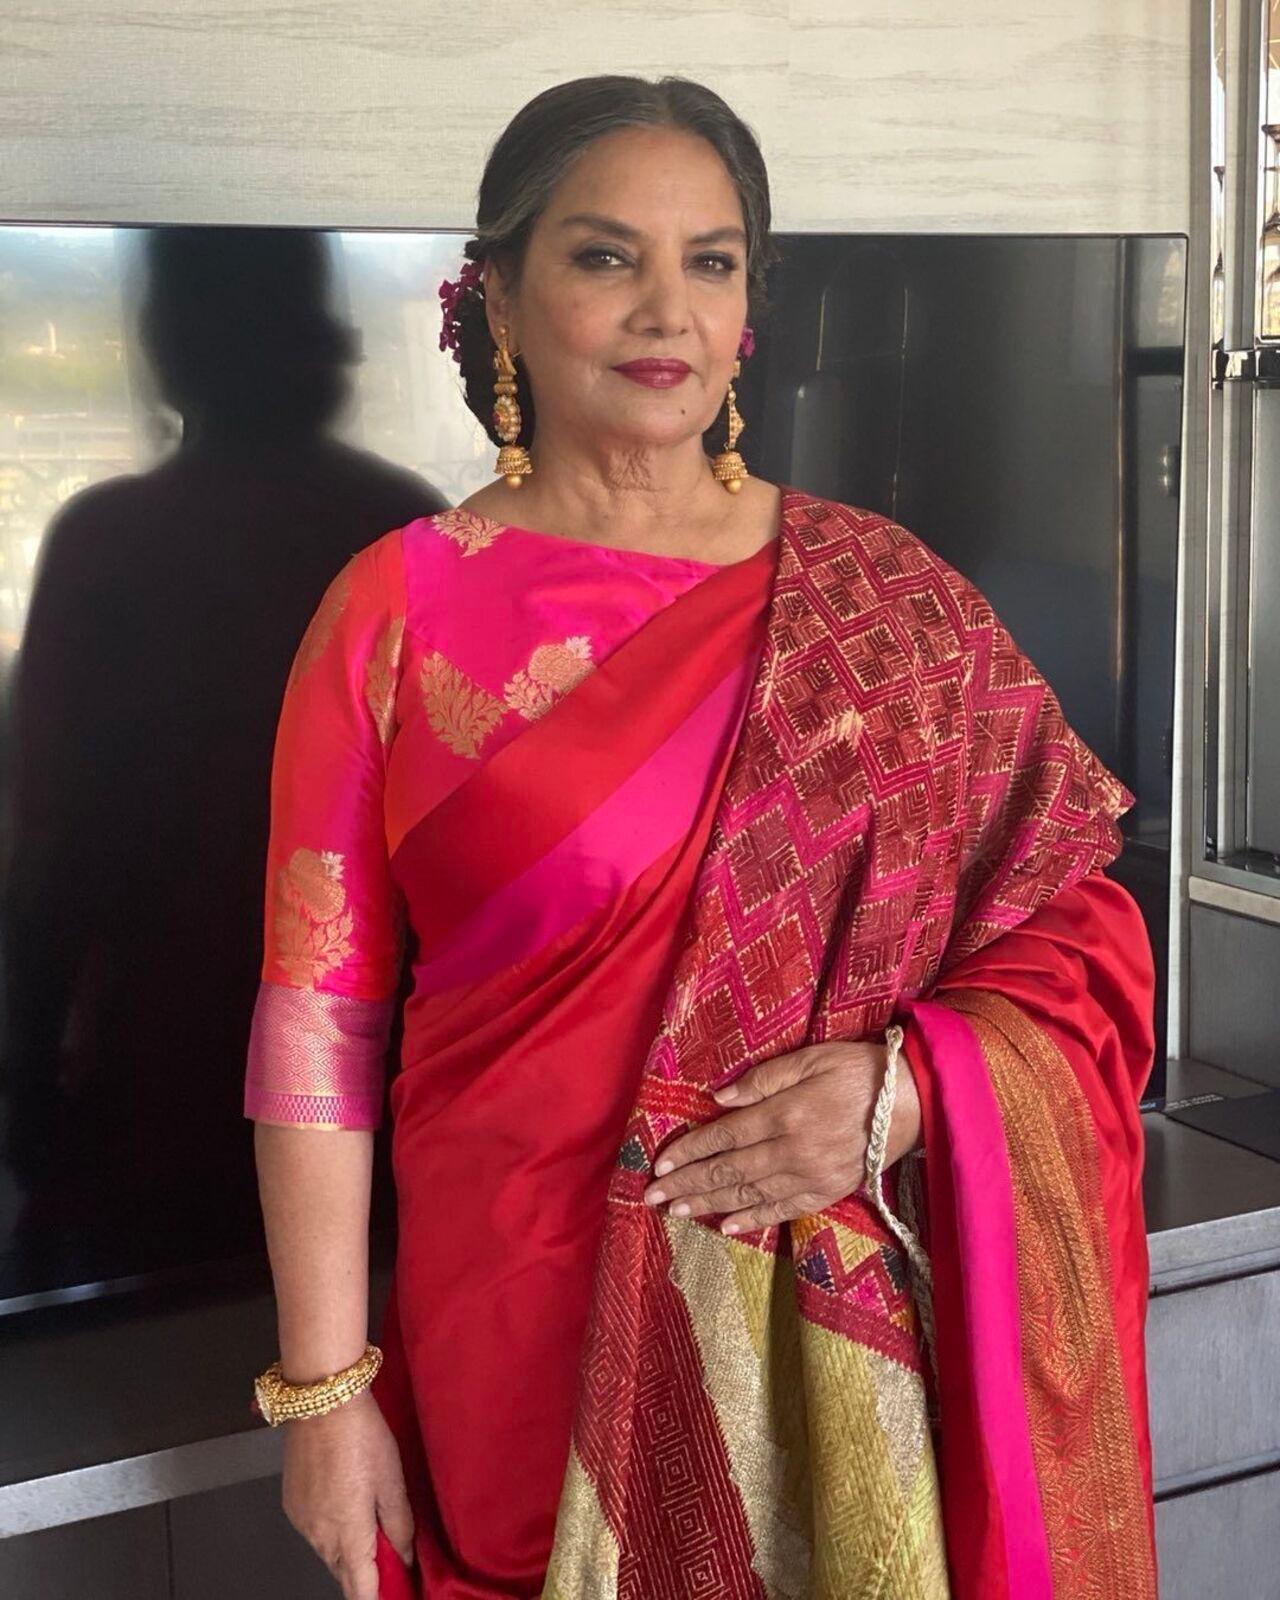 In addition to her acting career, Shabana Azmi has been actively involved in social and political causes